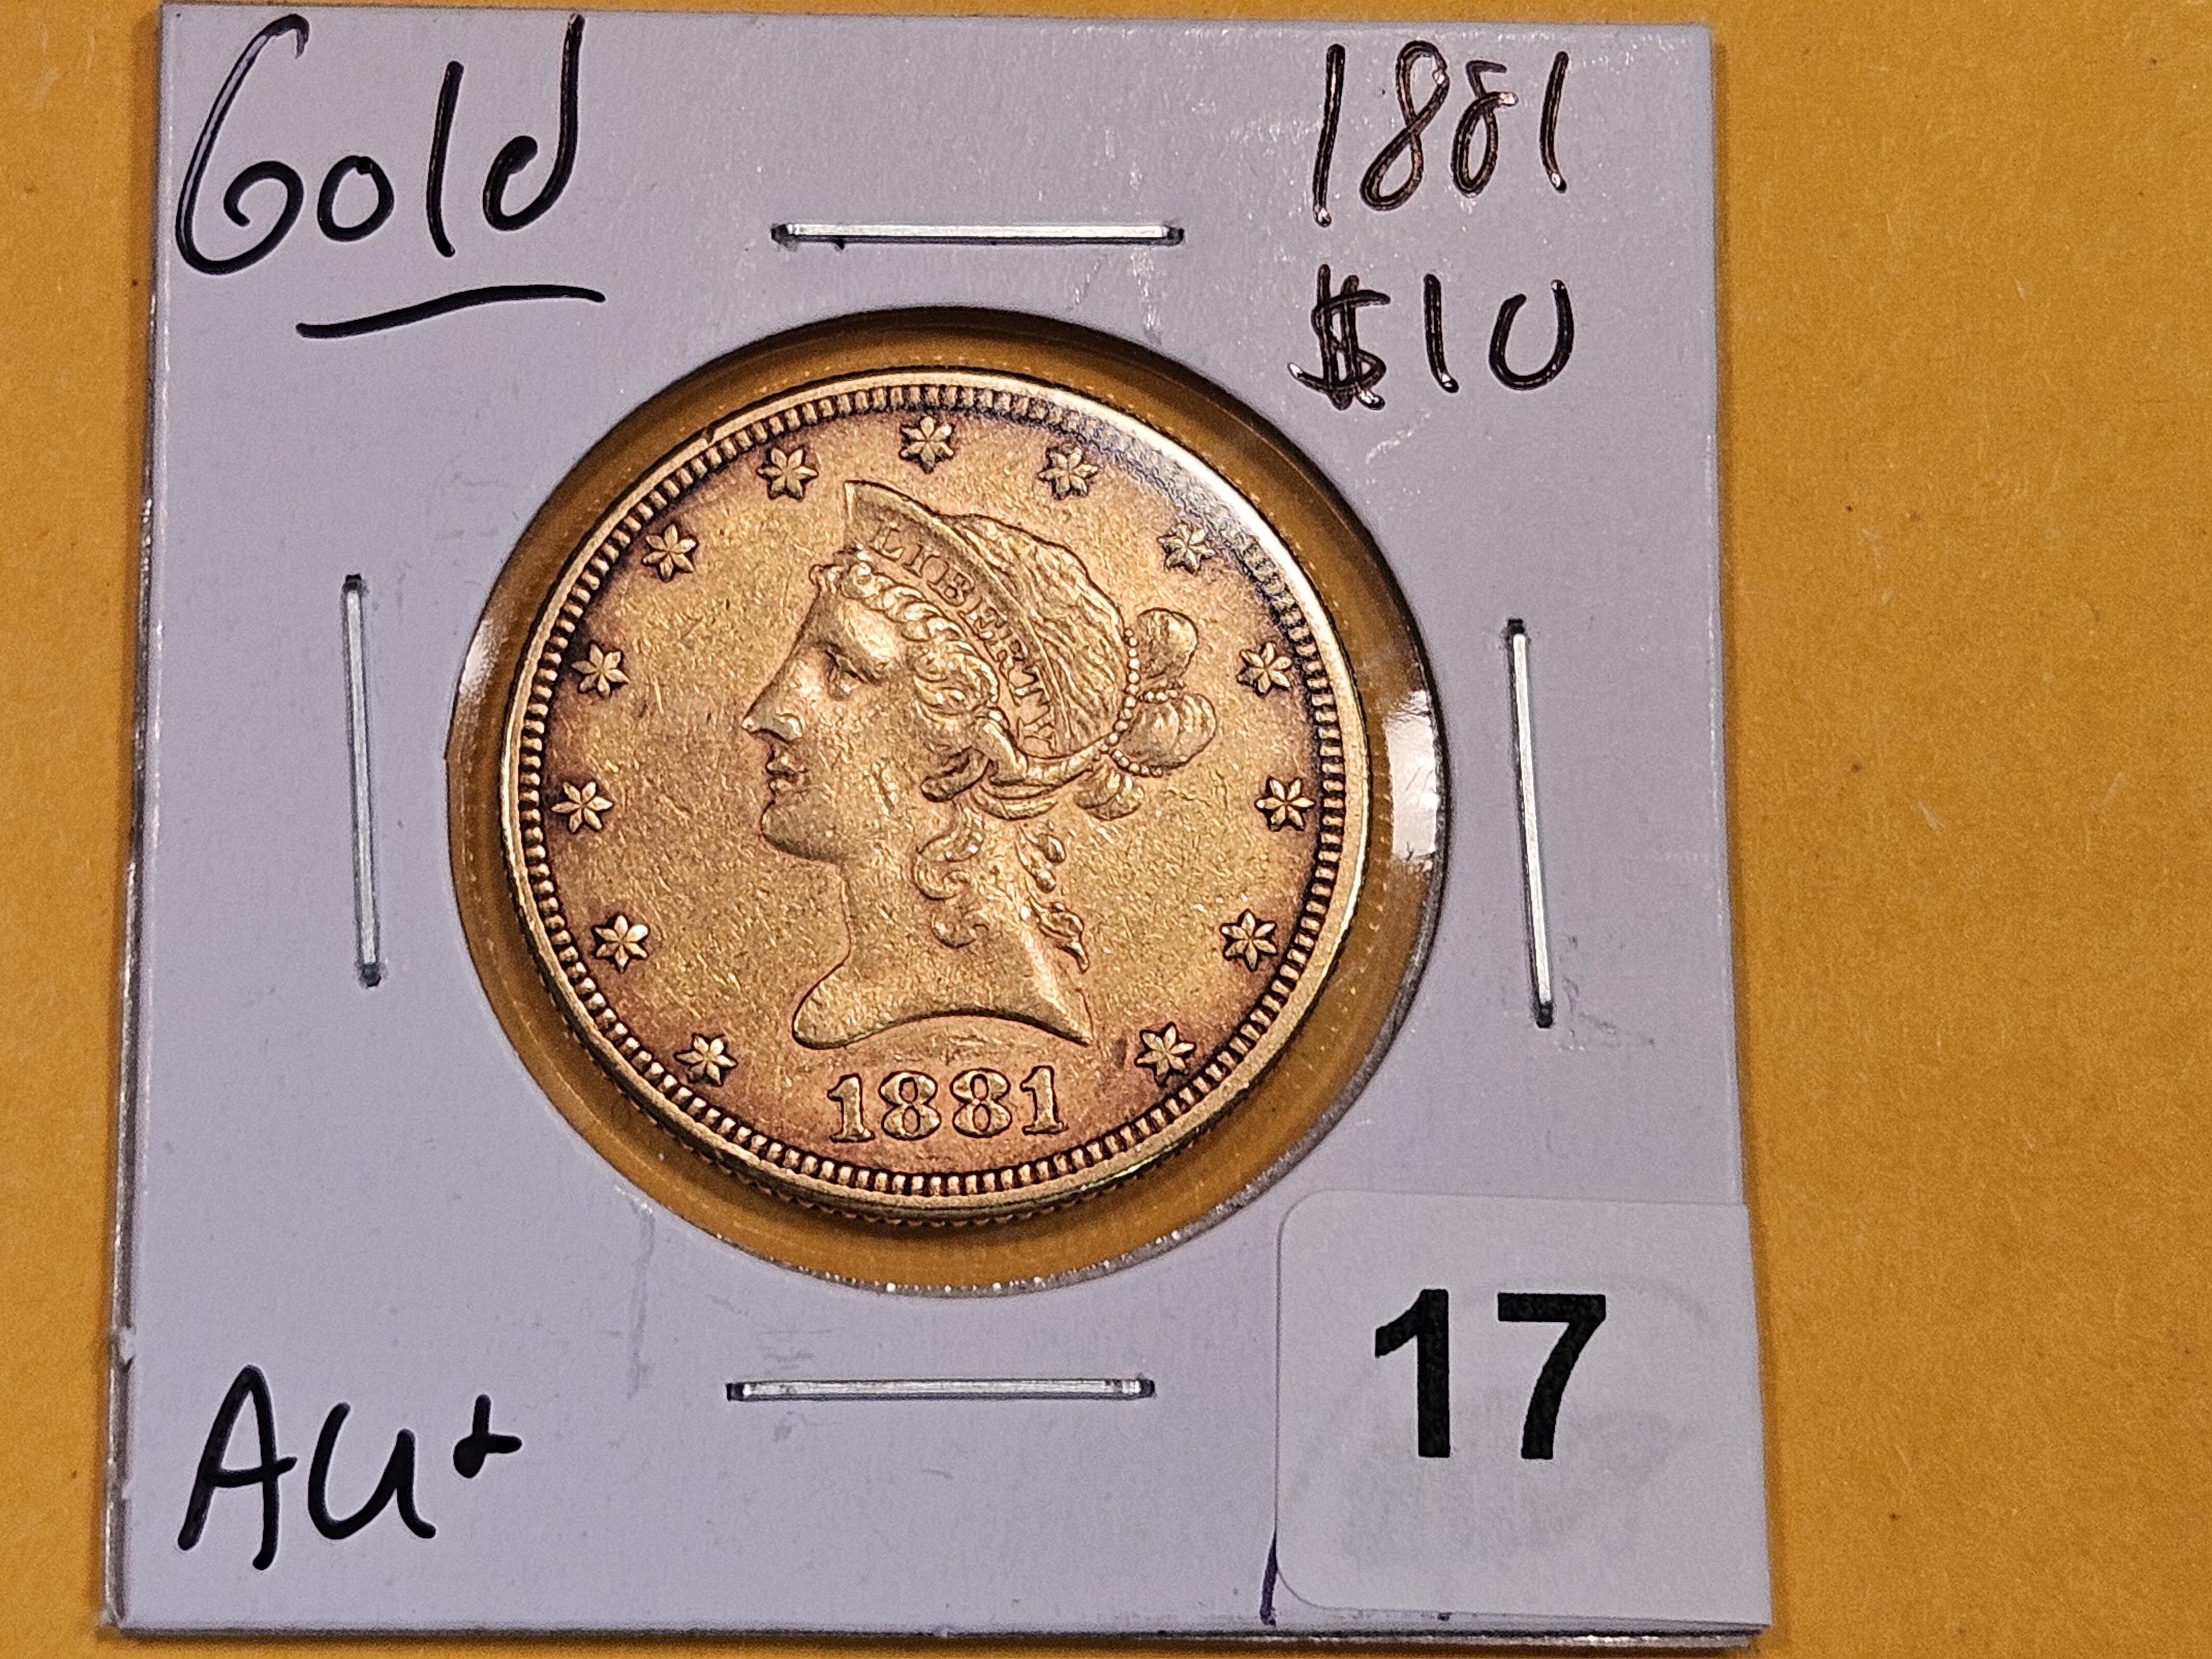 GOLD! 1881 Liberty Head Gold Ten Dollar Eagle in About Uncirculated